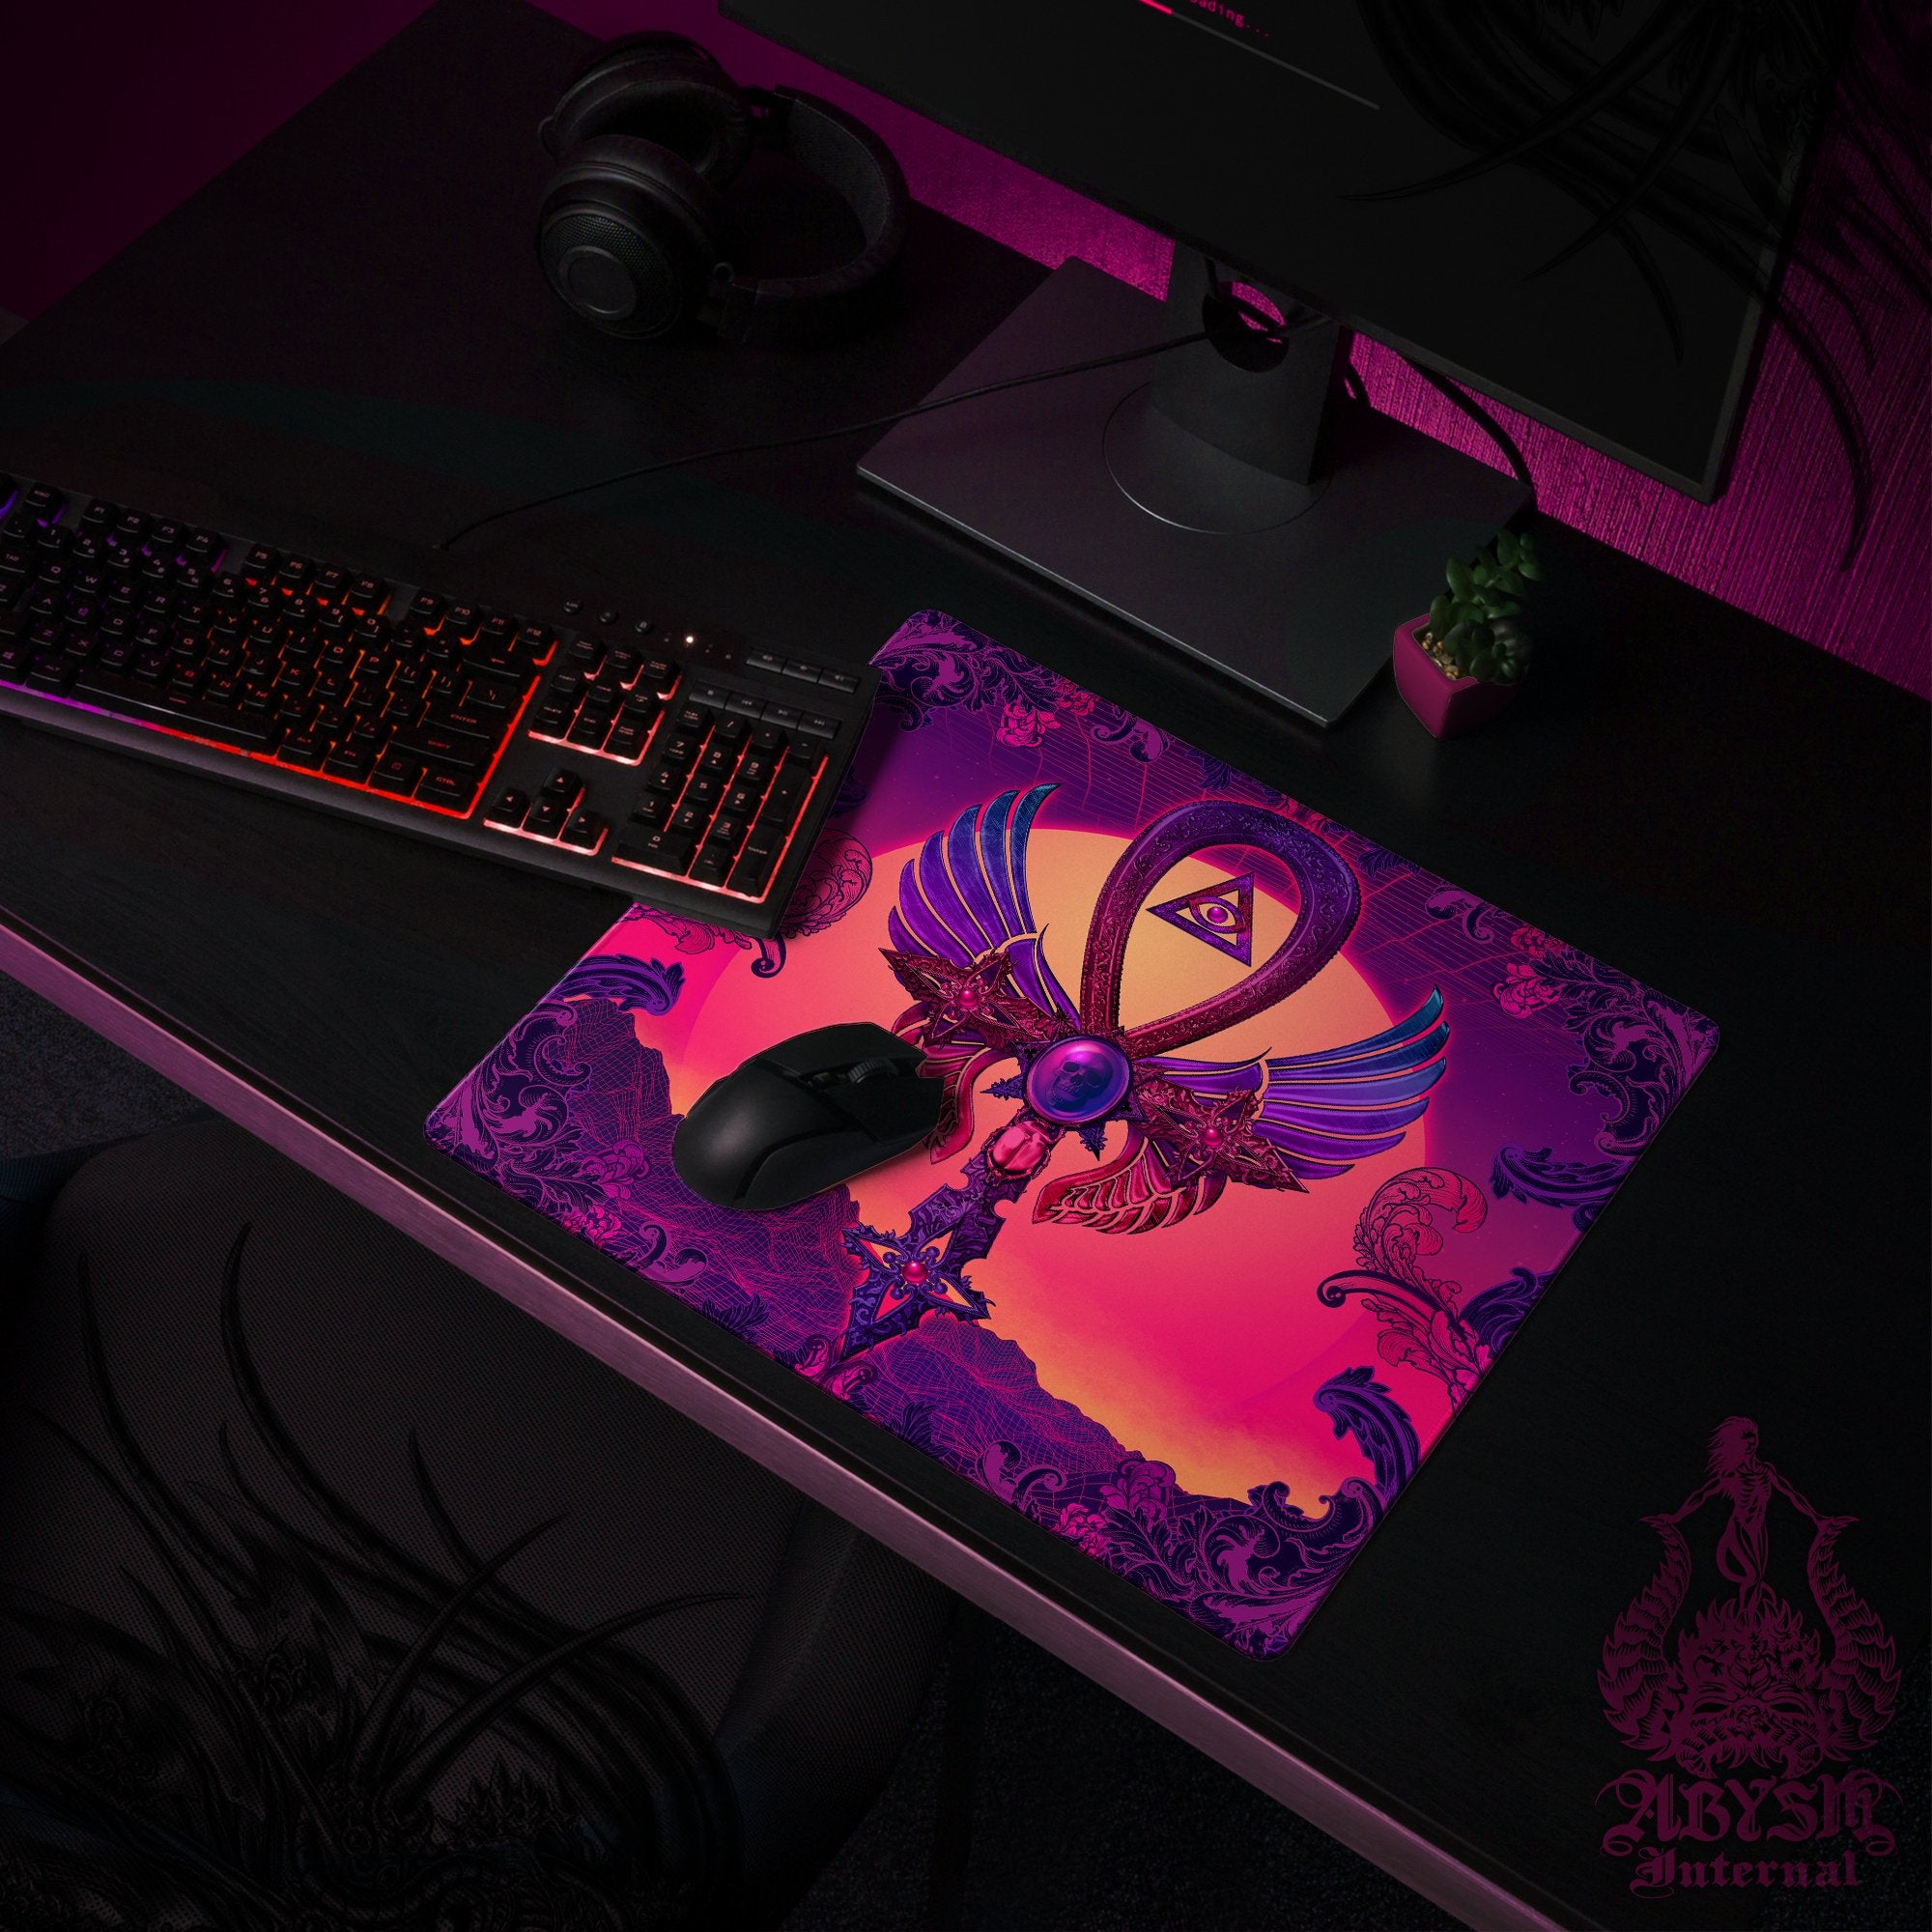 Vaporwave Workpad, Ankh Desk Mat, Cross Gaming Mouse Pad, Psychedelic Table Protector Cover, Trippy Art Print - Abysm Internal